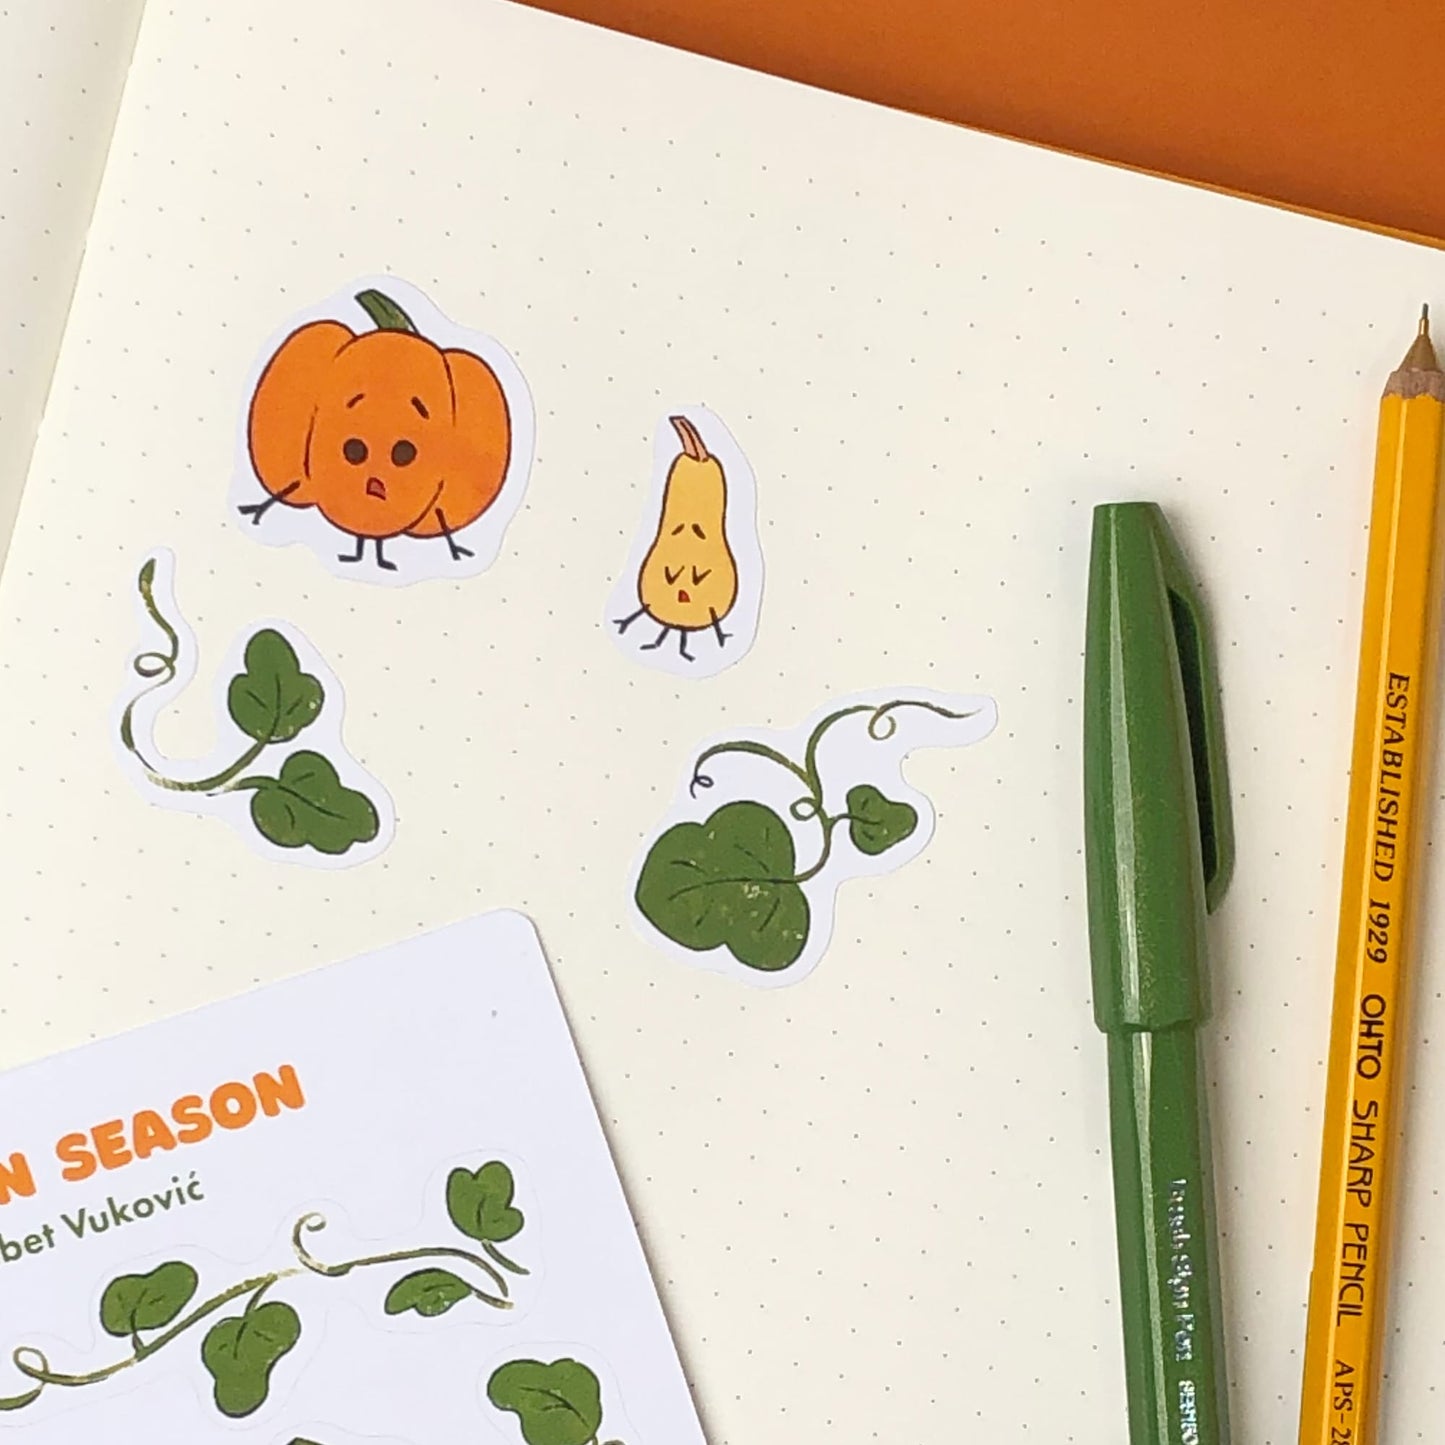 Pumpkins stickers on a journal page beside pens.